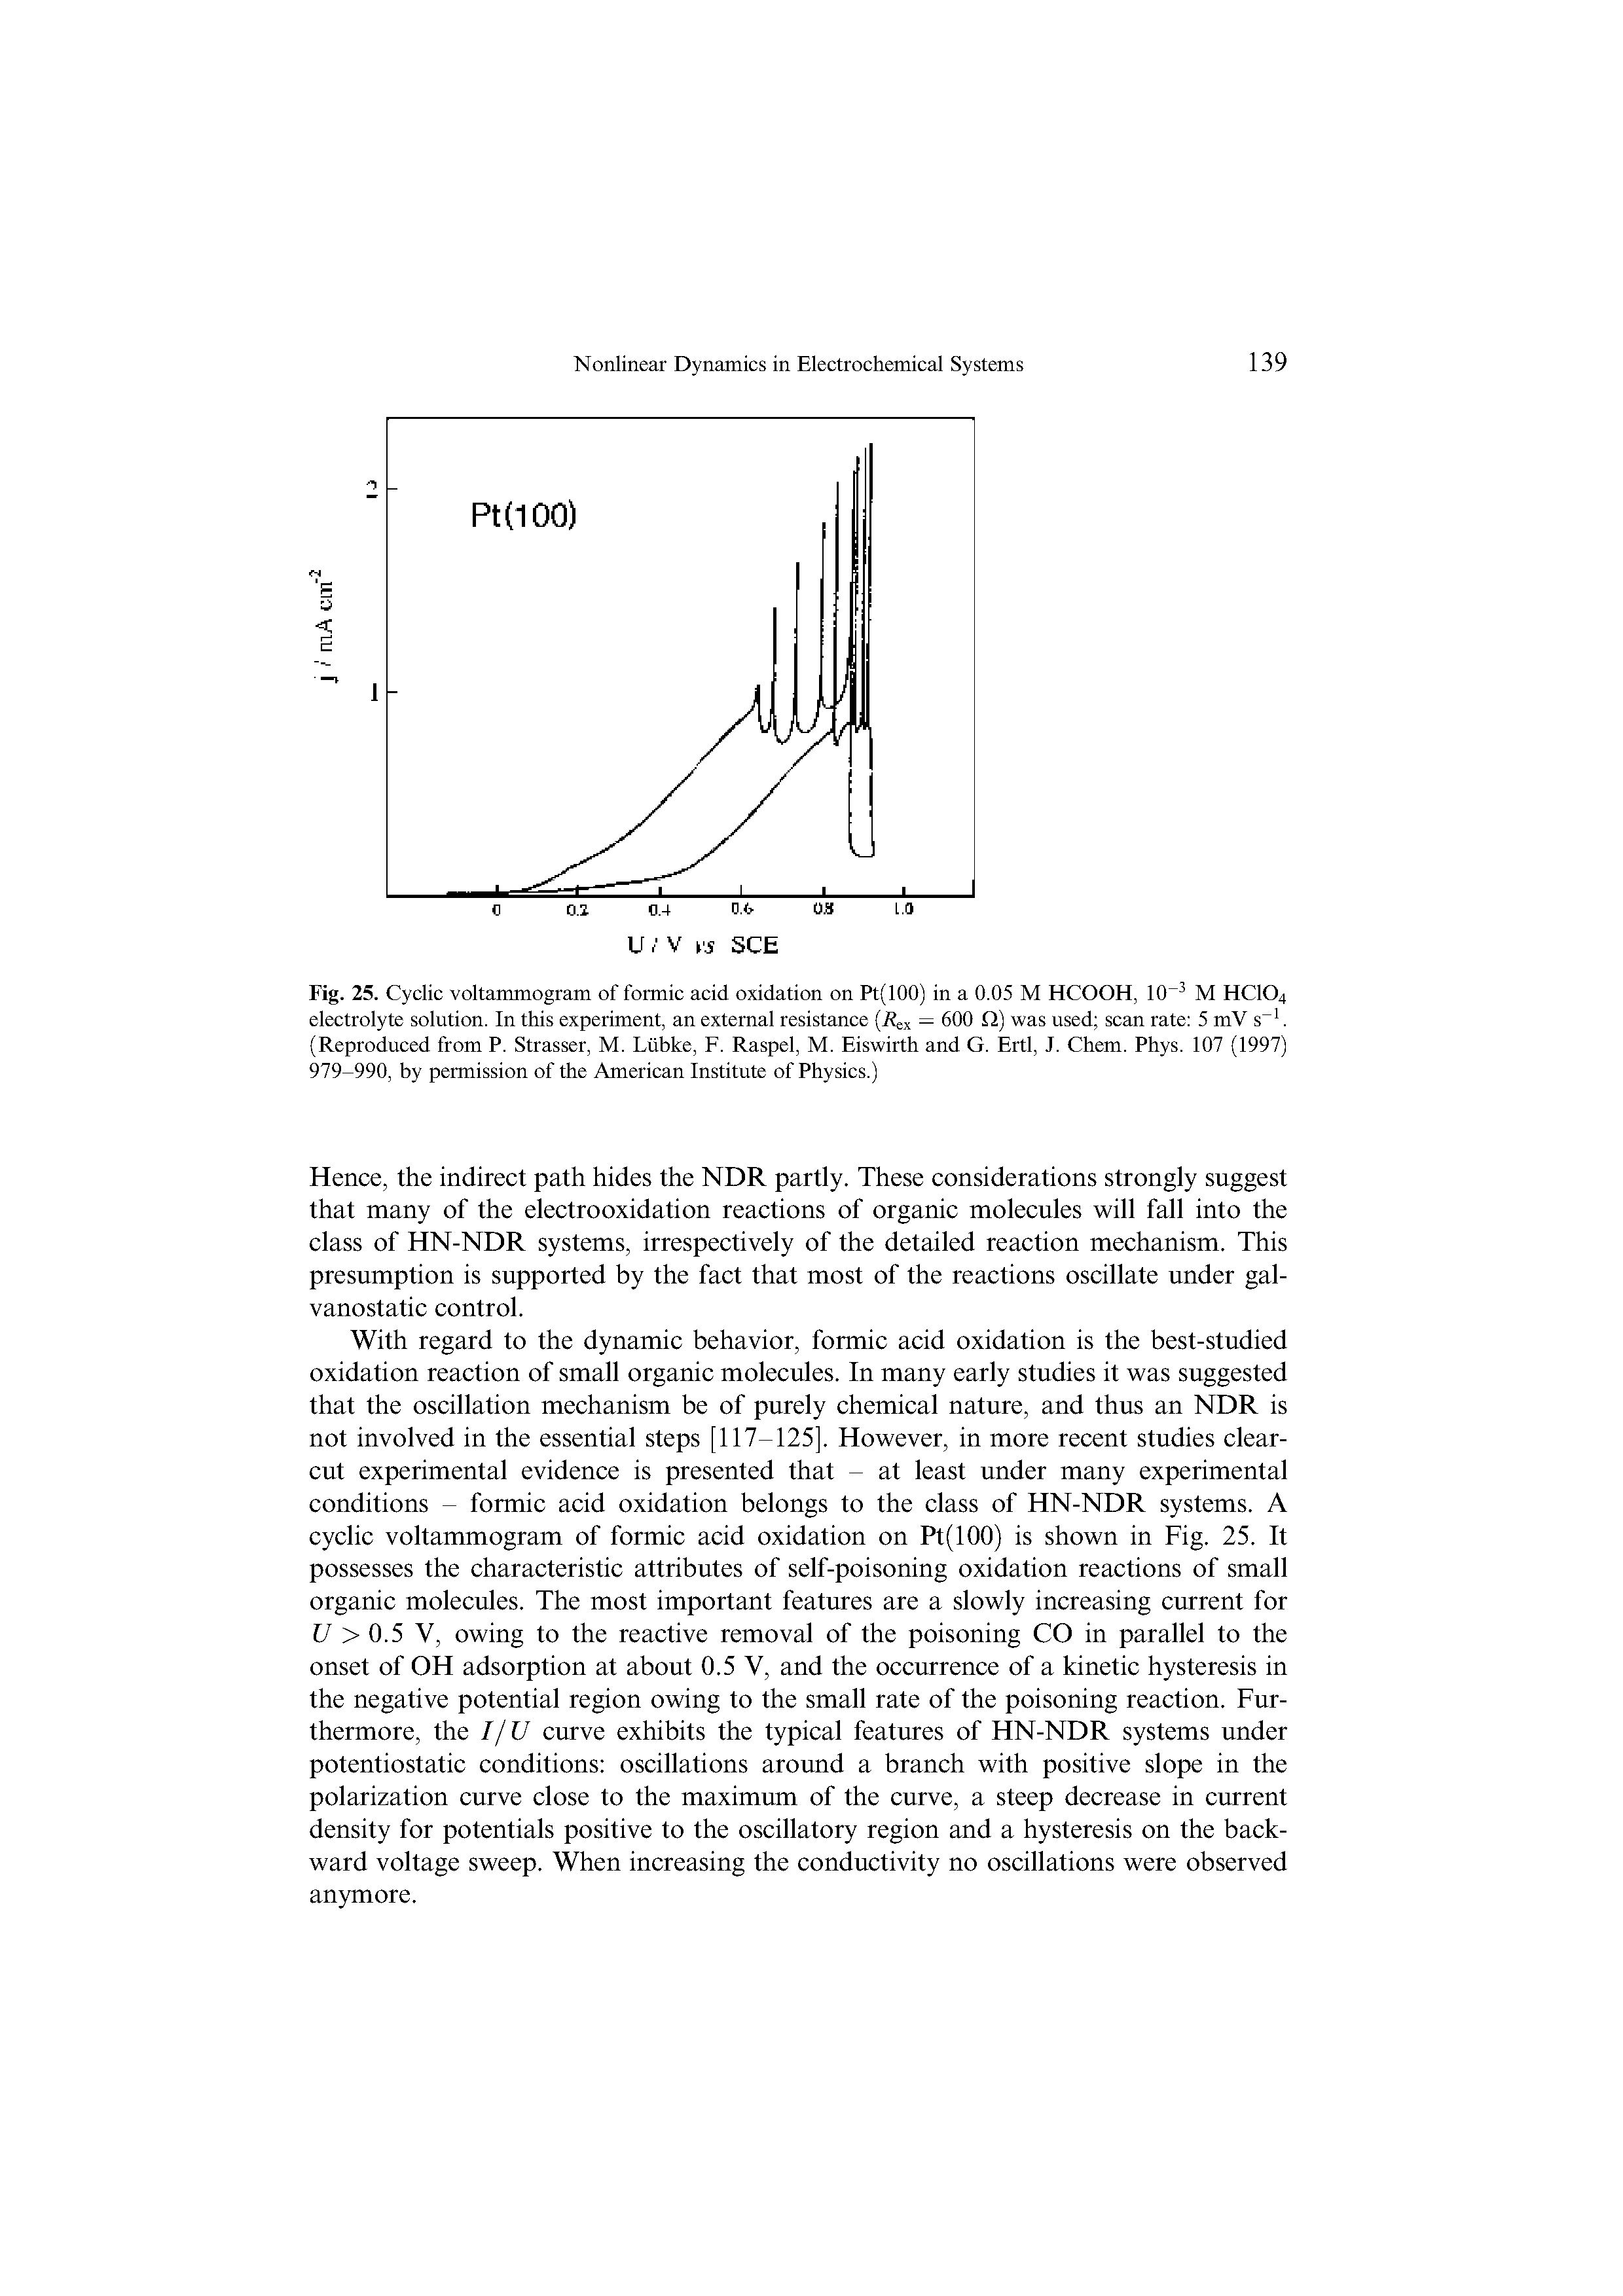 Fig. 25. Cyclic voltammogram of formic acid oxidation on Pt(100) in a 0.05 M HCOOH, 10-3 M HC104 electrolyte solution. In this experiment, an external resistance (i x = 600 Q) was used scan rate 5 mV s-1. (Reproduced from P. Strasser, M. Liibke, F. Raspel, M. Eiswirth and G. Ertl, J. Chem. Phys. 107 (1997) 979-990, by permission of the American Institute of Physics.)...